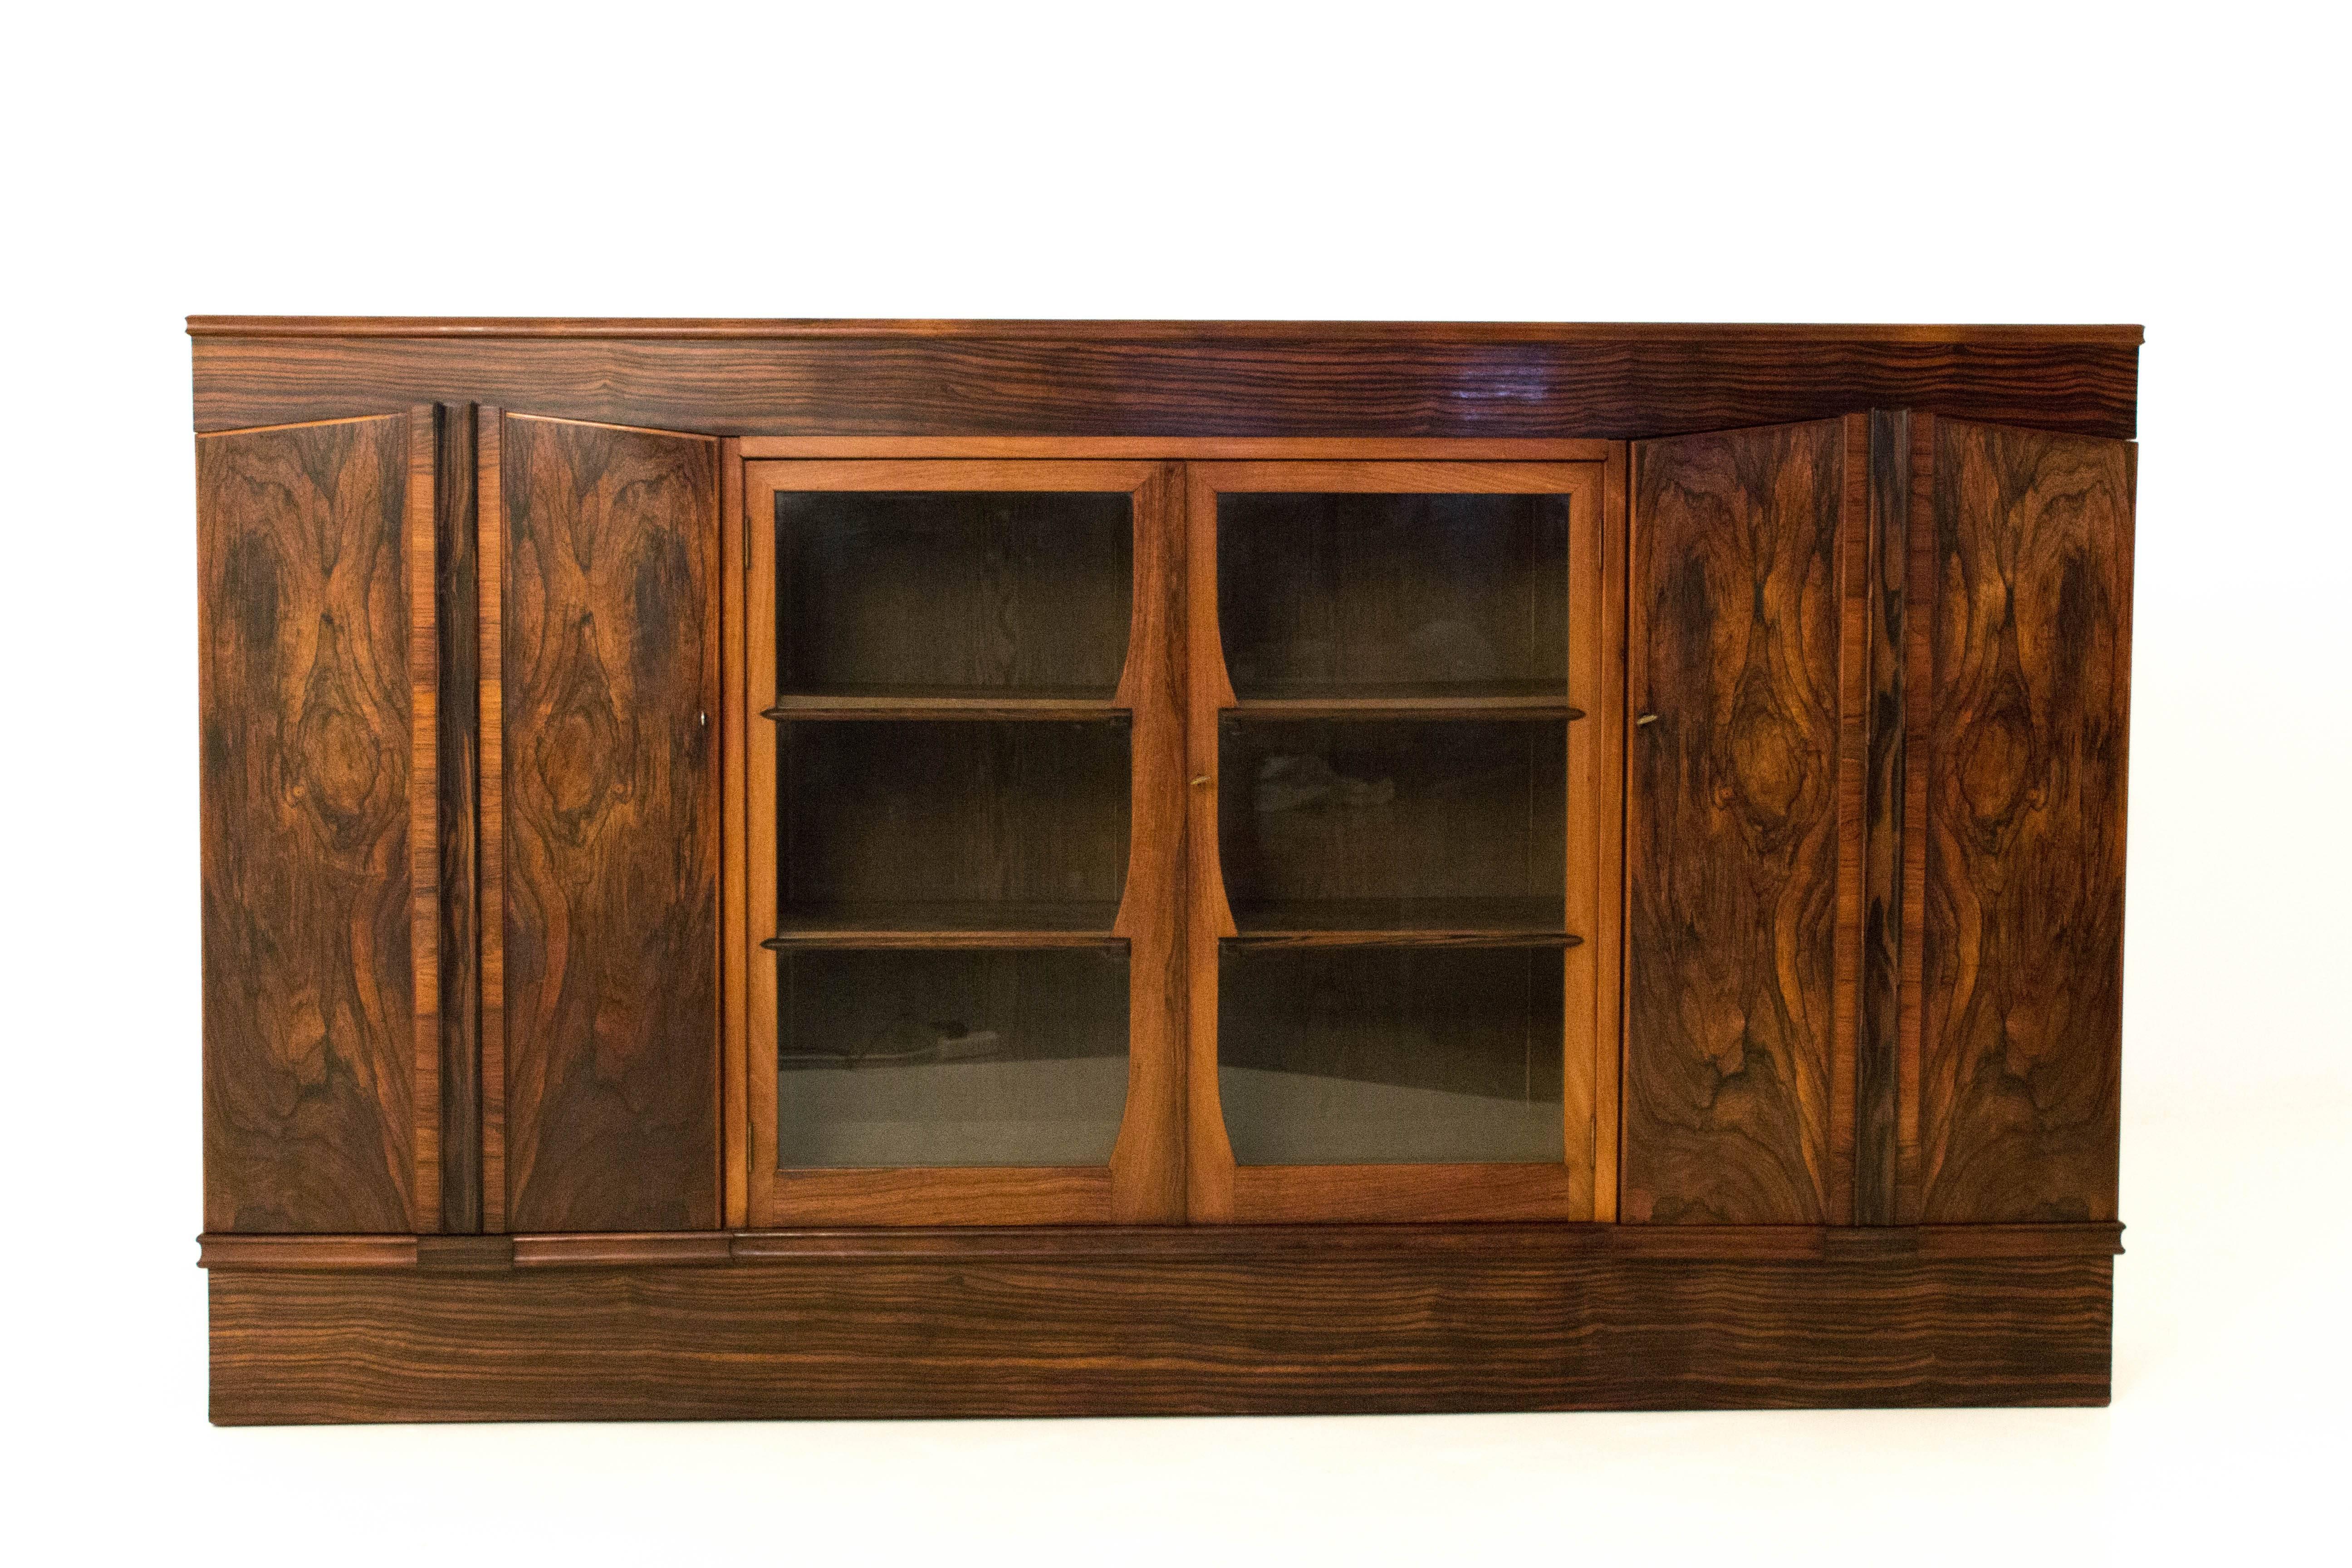 Early 20th Century Rare and Large Art Deco Amsterdam School Bookcase by Max Coini Amsterdam